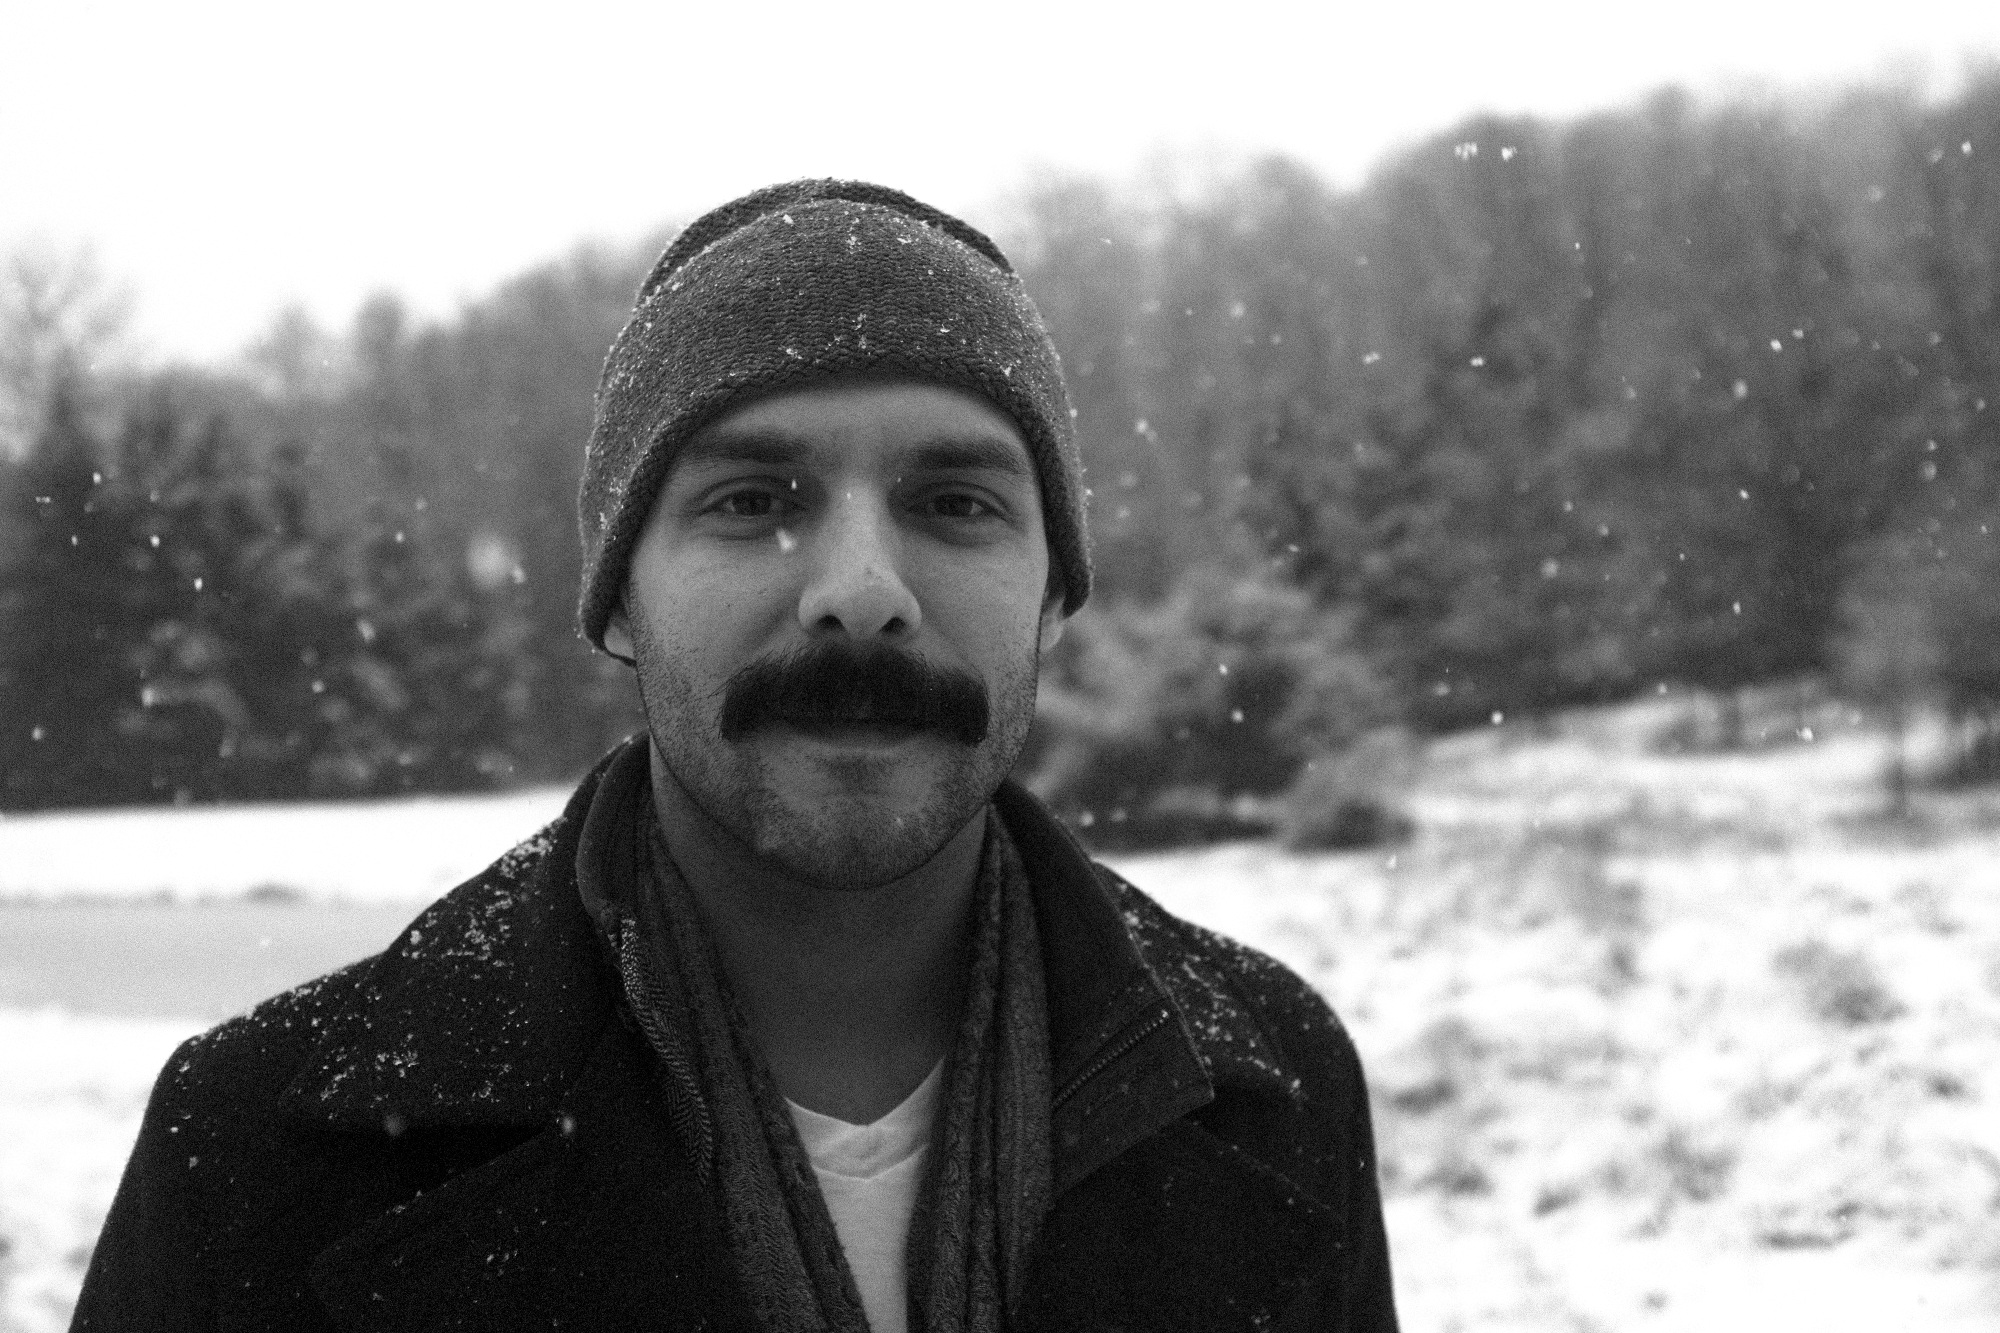 Paul in the snow